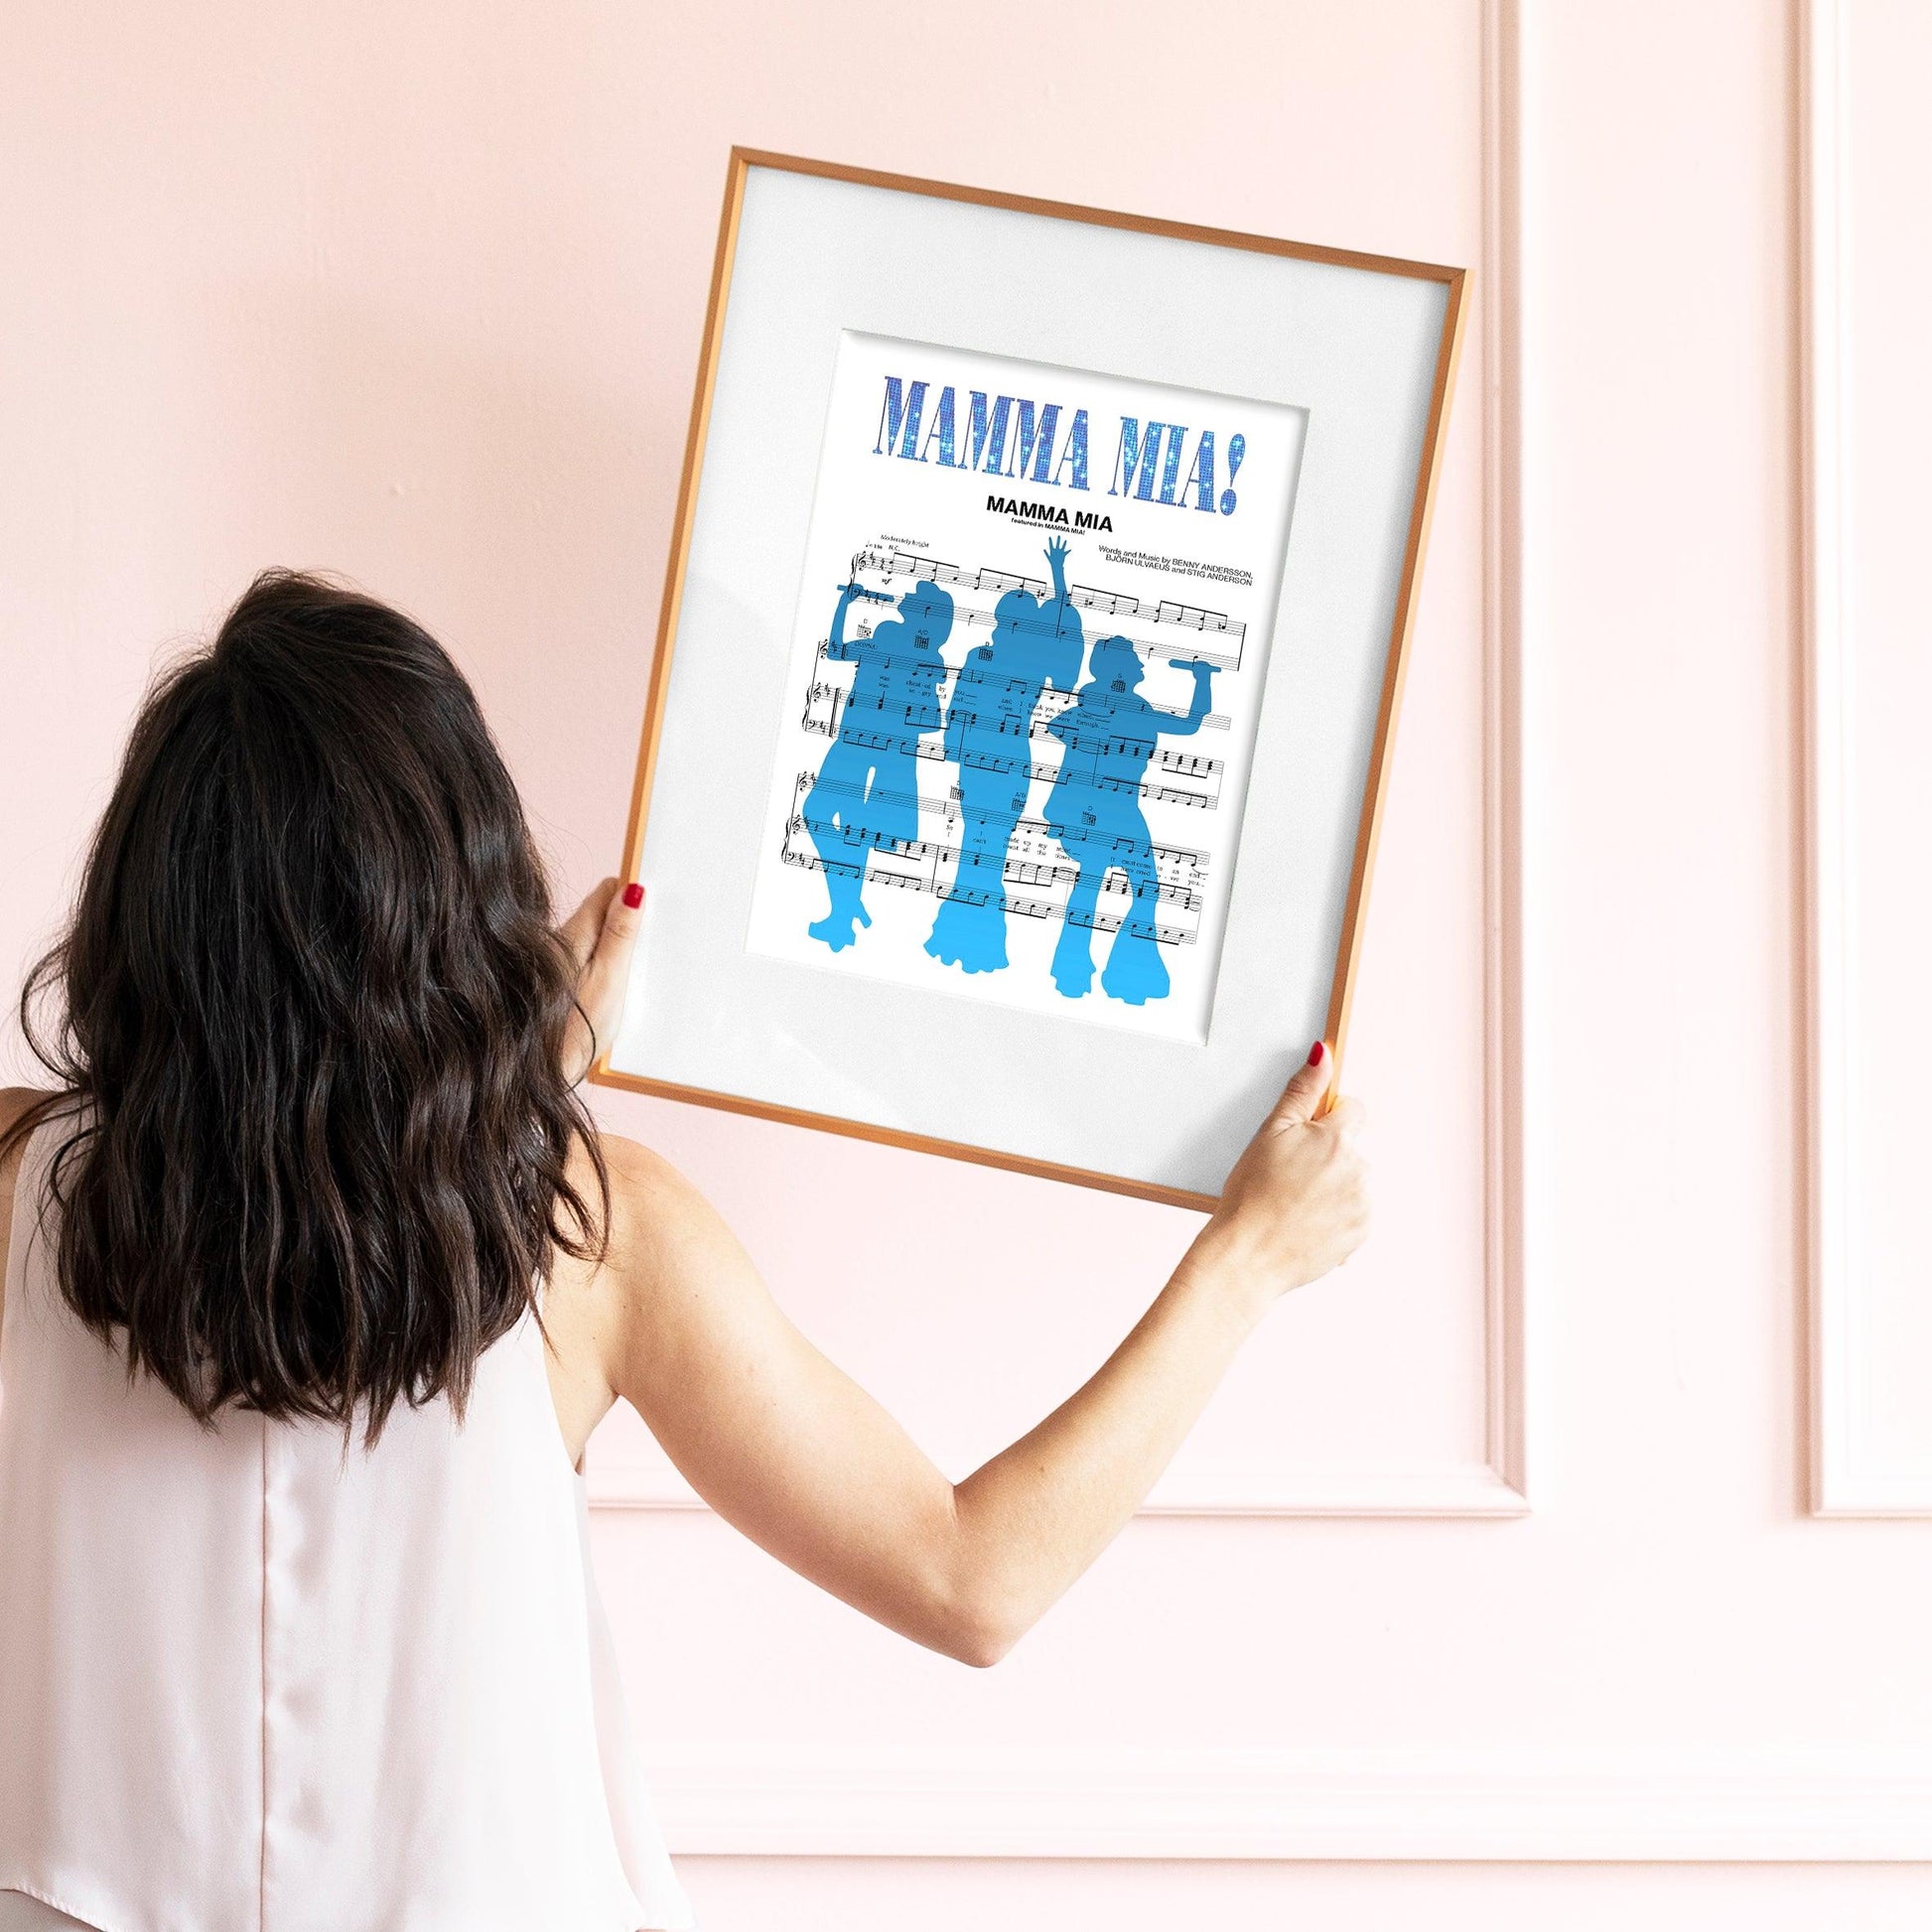 Abba • Mamma Mia Song Lyric Print | Song Music Sheet Notes Print  Everyone has a favorite Abba song and now you can show the score as printed staff. The personal favorite song sheet print shows the song chosen as the score. 